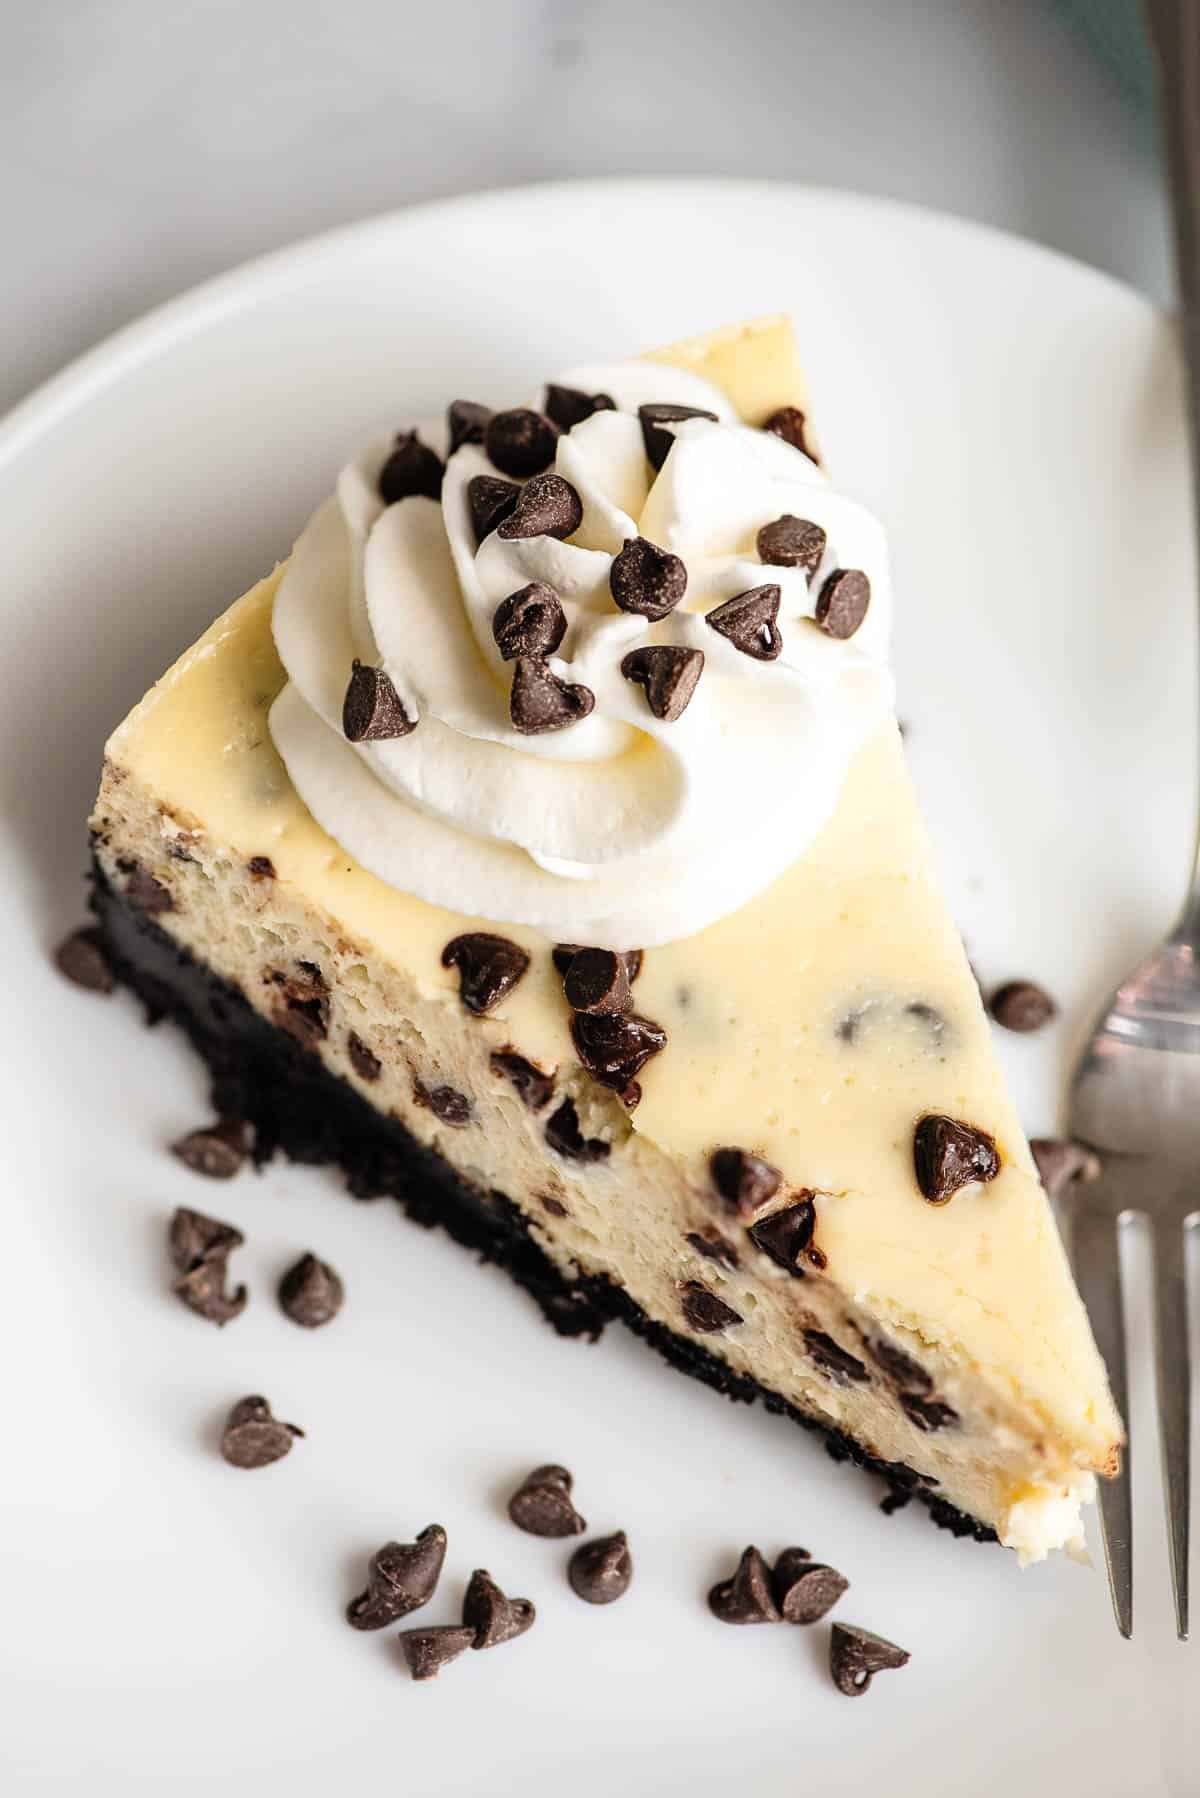 chocolate chip cheesecake slice from above.